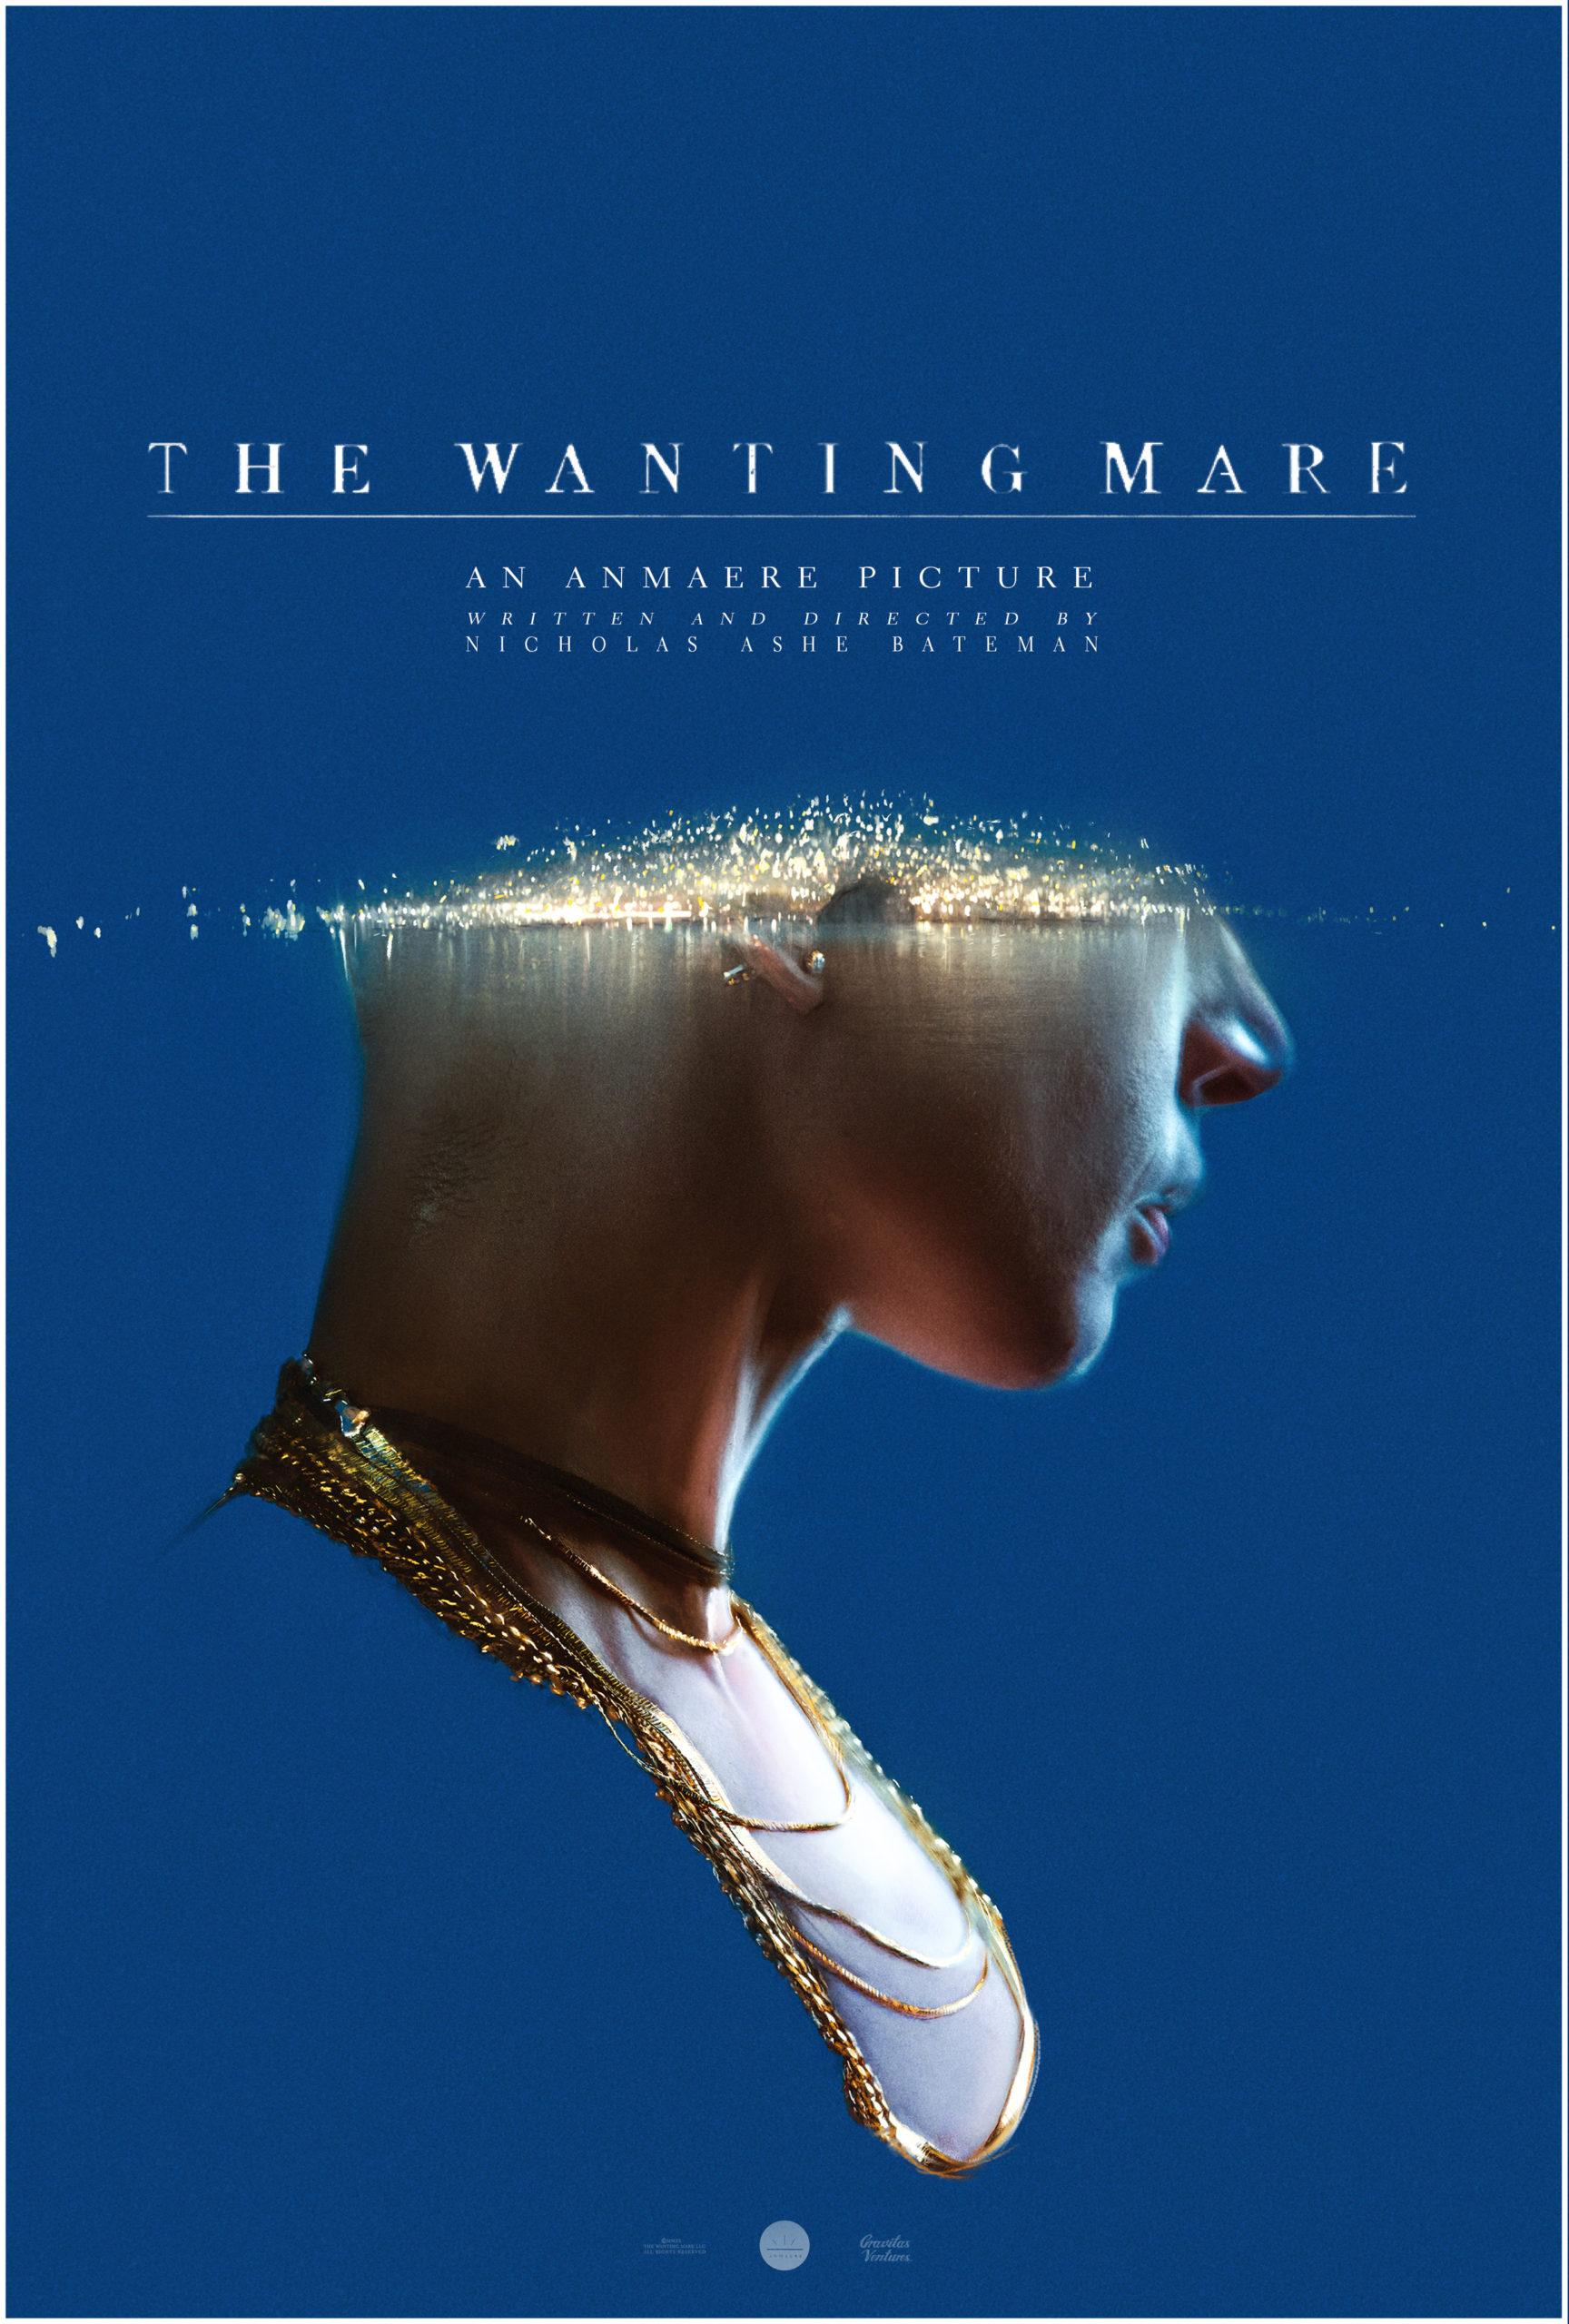 The Wanting Mare (2021)